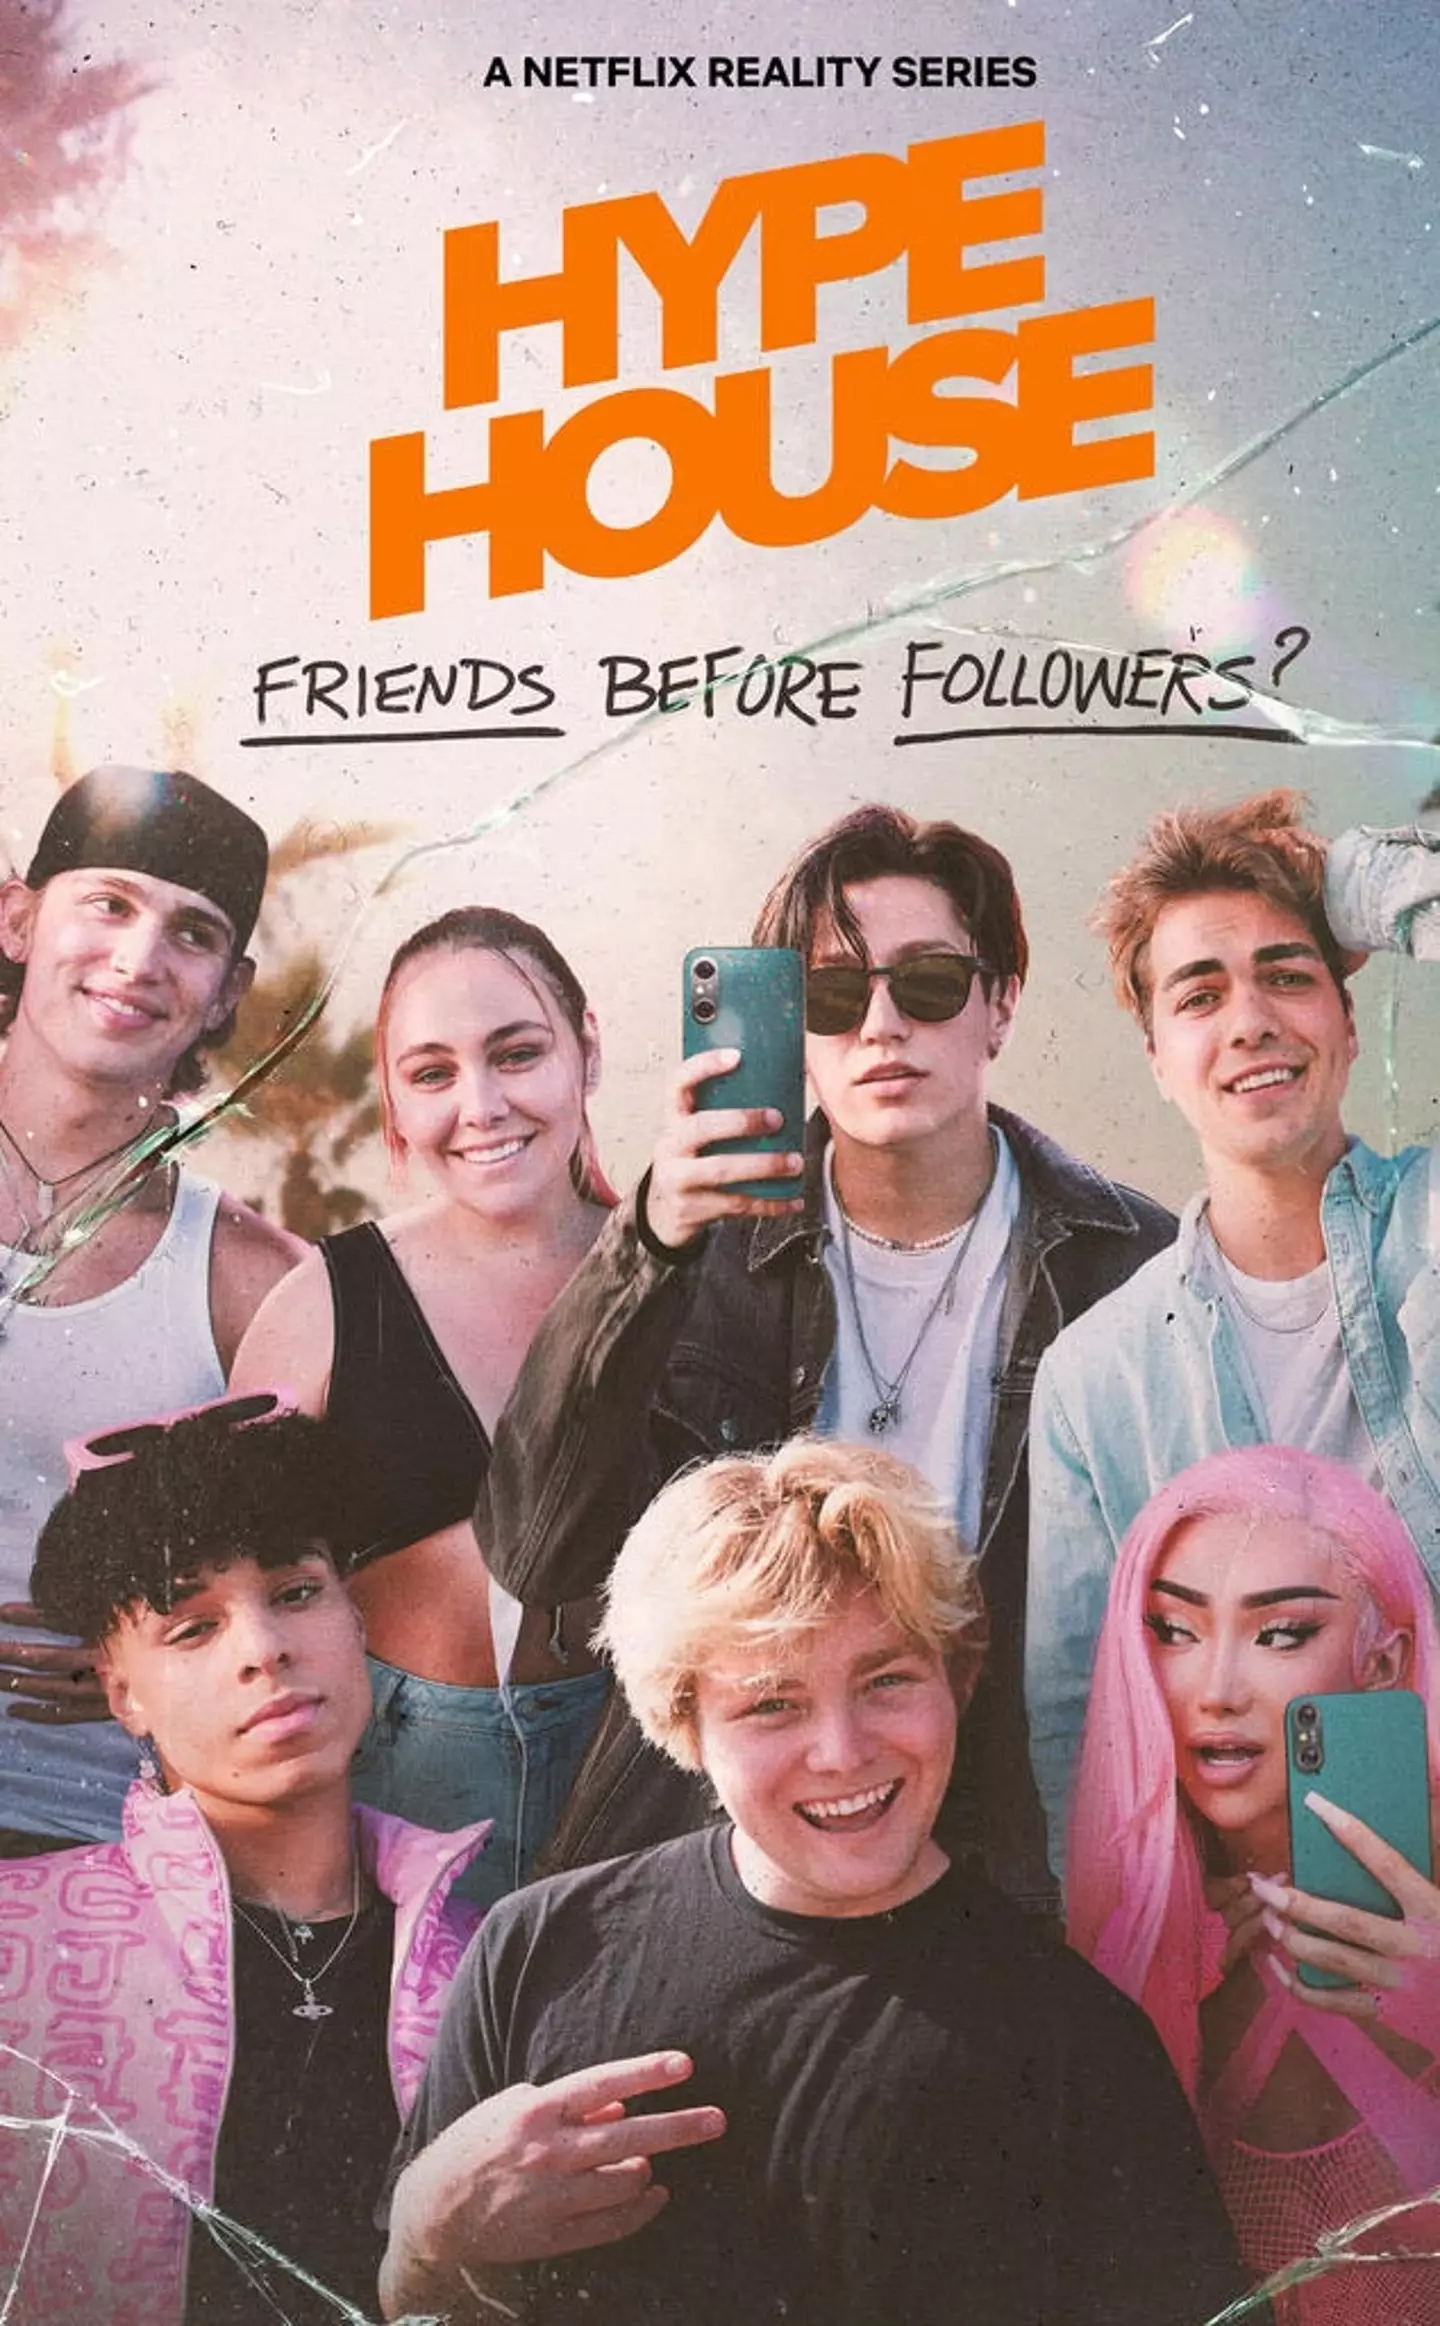 The Hype House dropped on Netflix last weekend. (